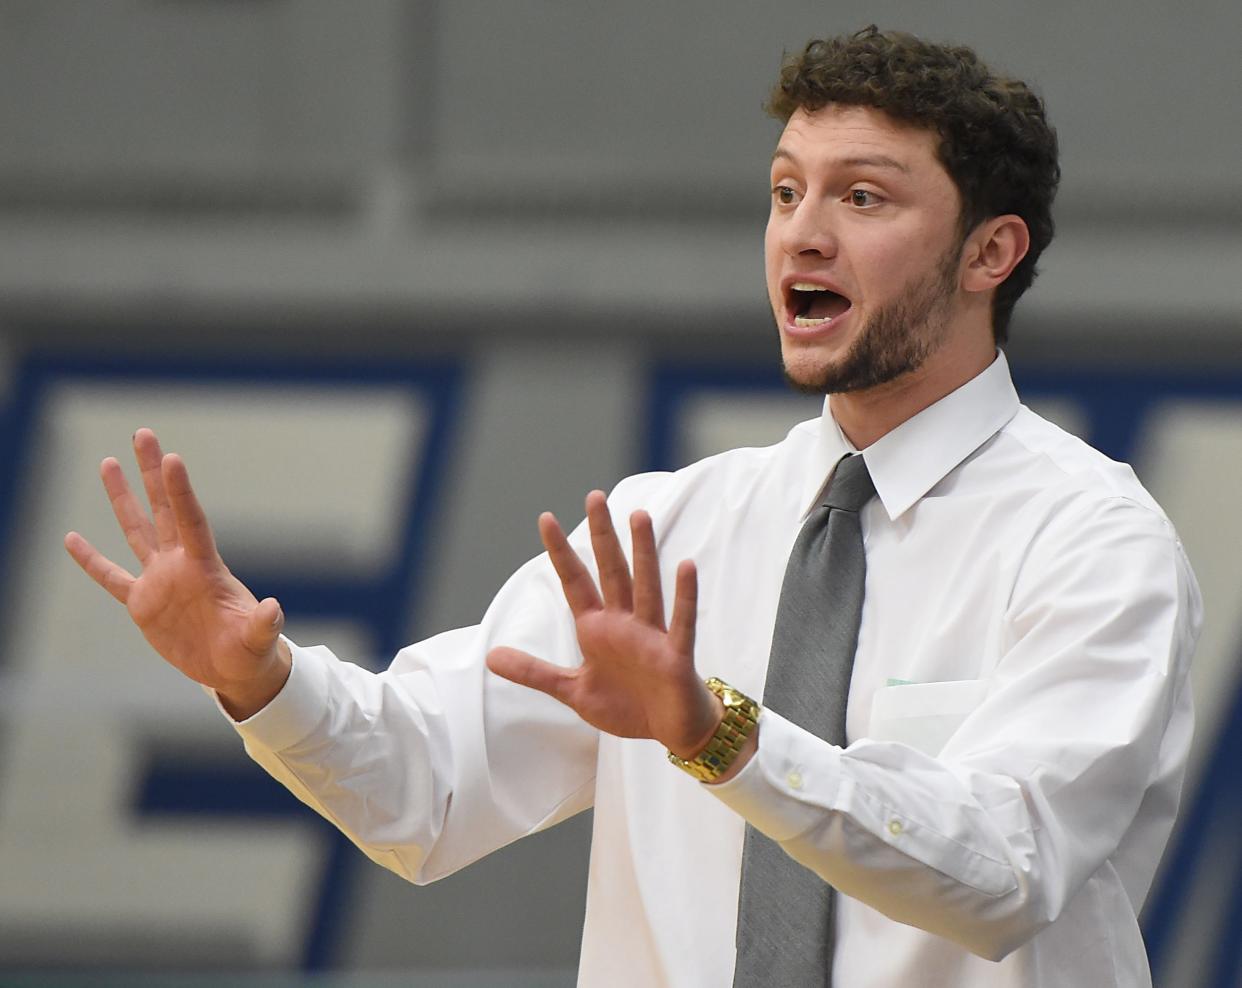 Blake DuDonis, shown coaching Gibraltar Carlson's girls basketball team during a game in 2016, is an assistant coach to his wife, Carly Thibault-DuDonis, at Fairfield, which will play Indiana in the NCAA Women's Basketball Tournament Saturday.